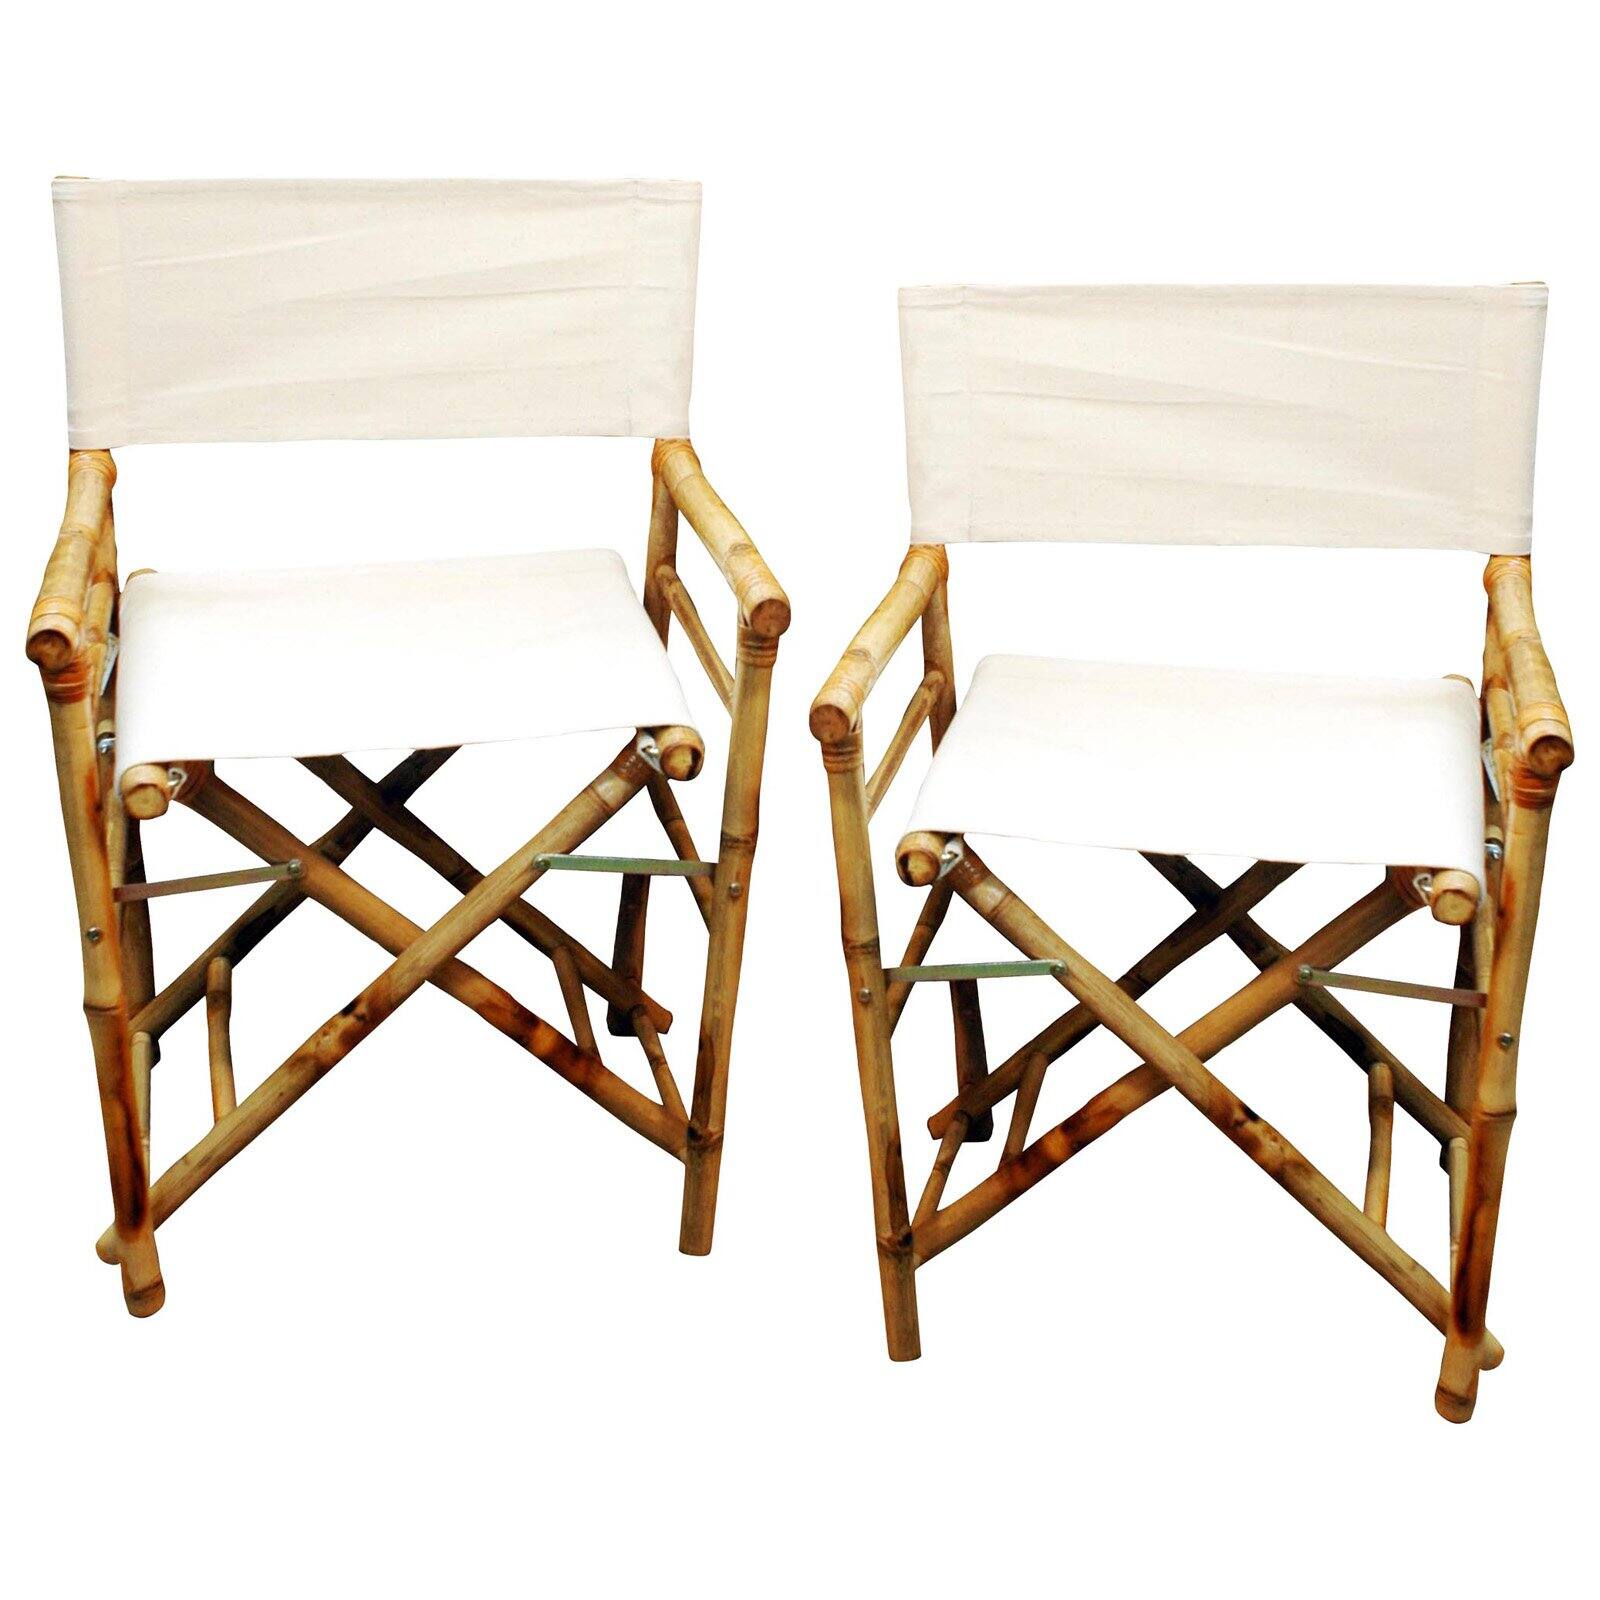 Bamboo54 Folding Bamboo Low Directors Chair with Canvas Cover - Set of 2 - image 2 of 5